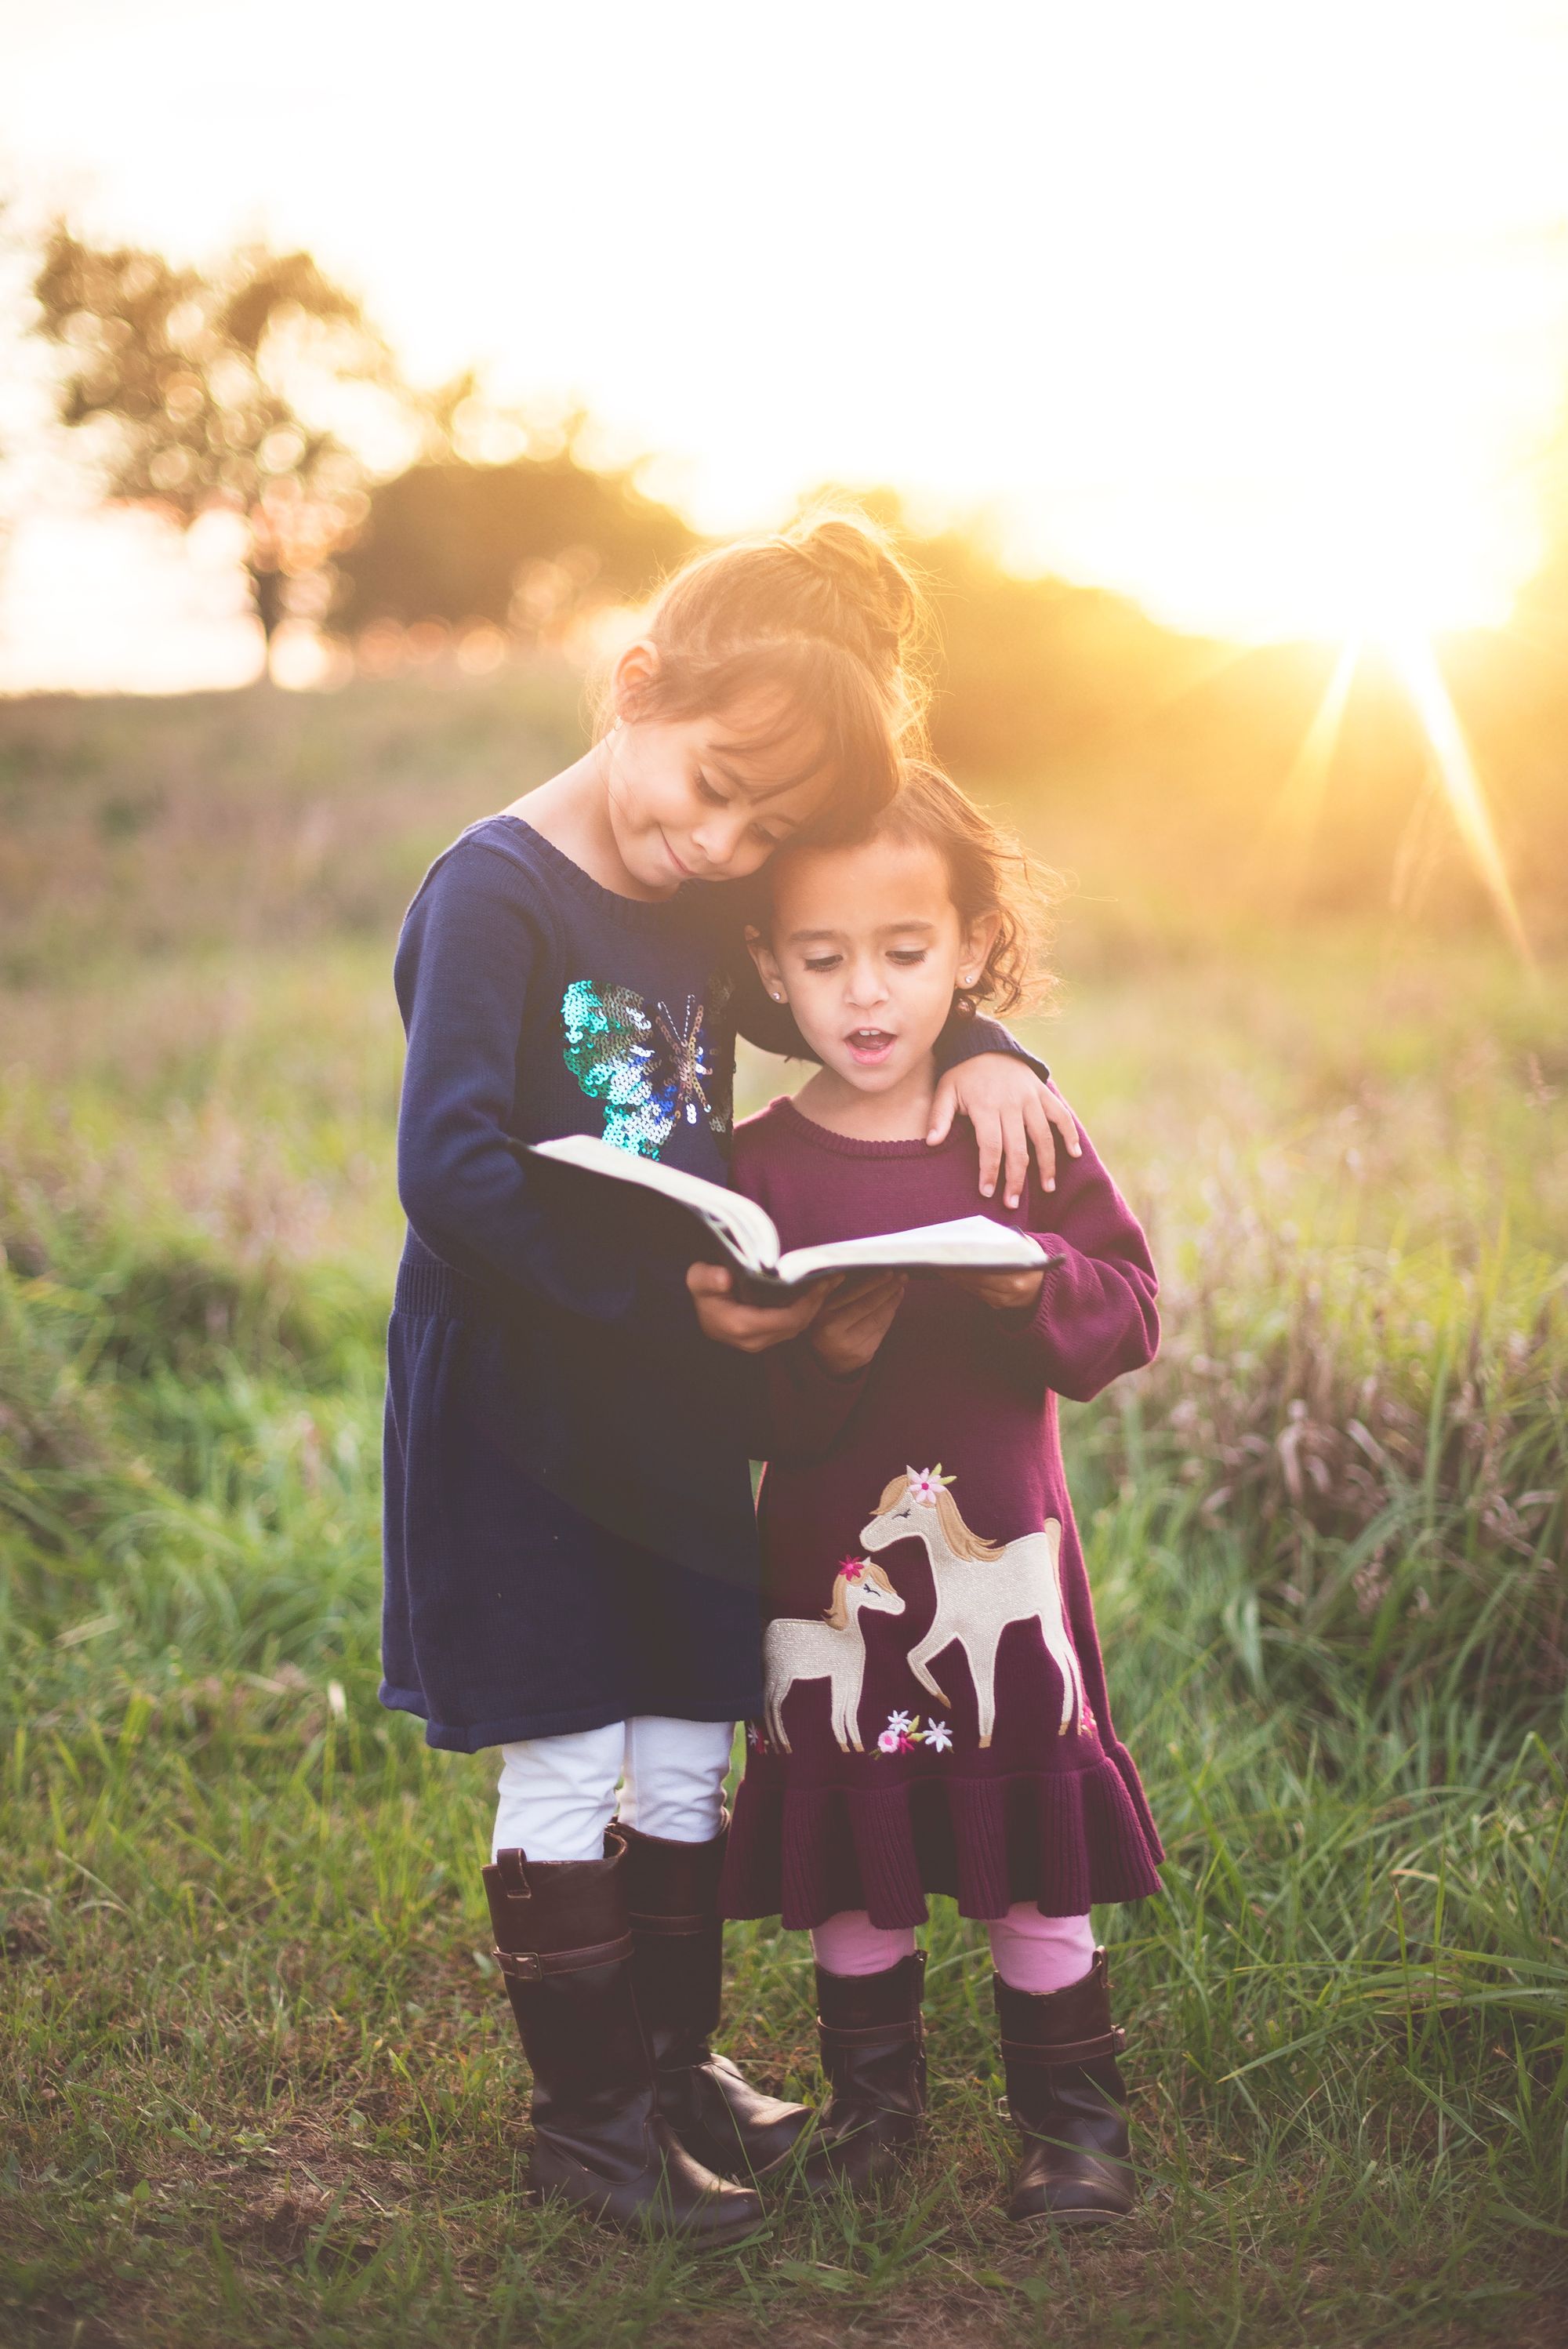 How to Include Siblings in Speech Therapy Activities